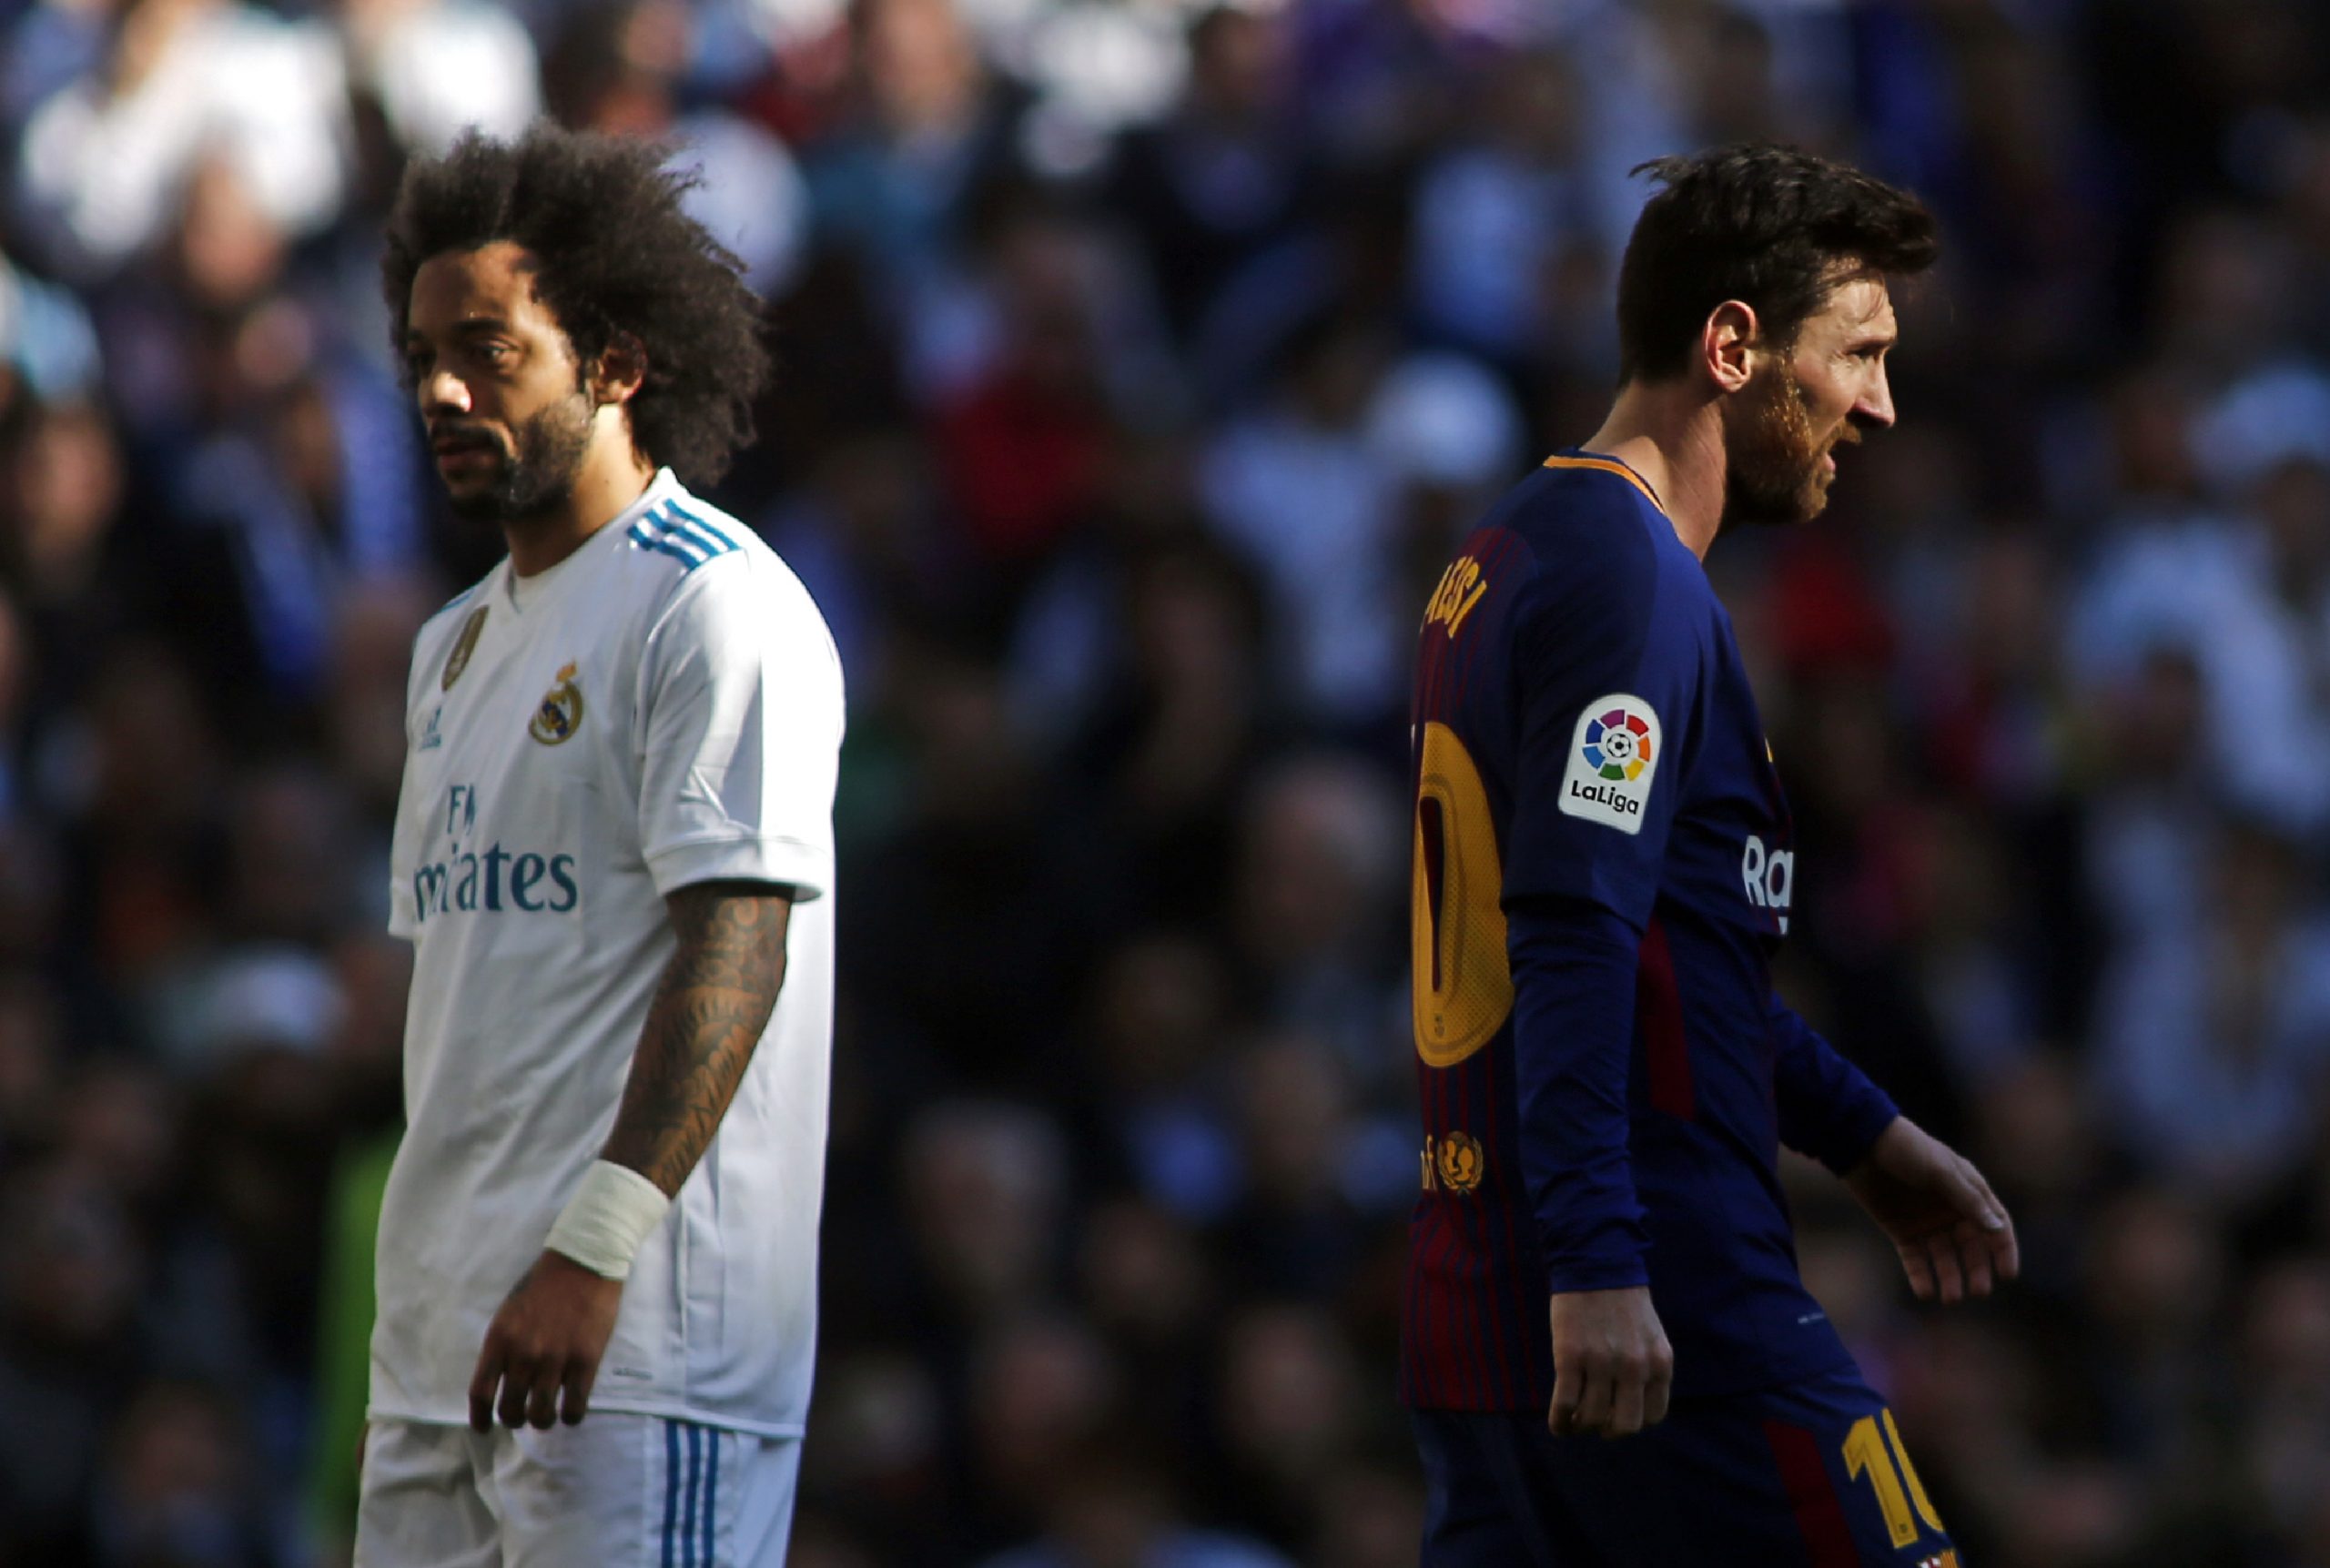 Marcelo names Lionel Messi as his toughest competitor